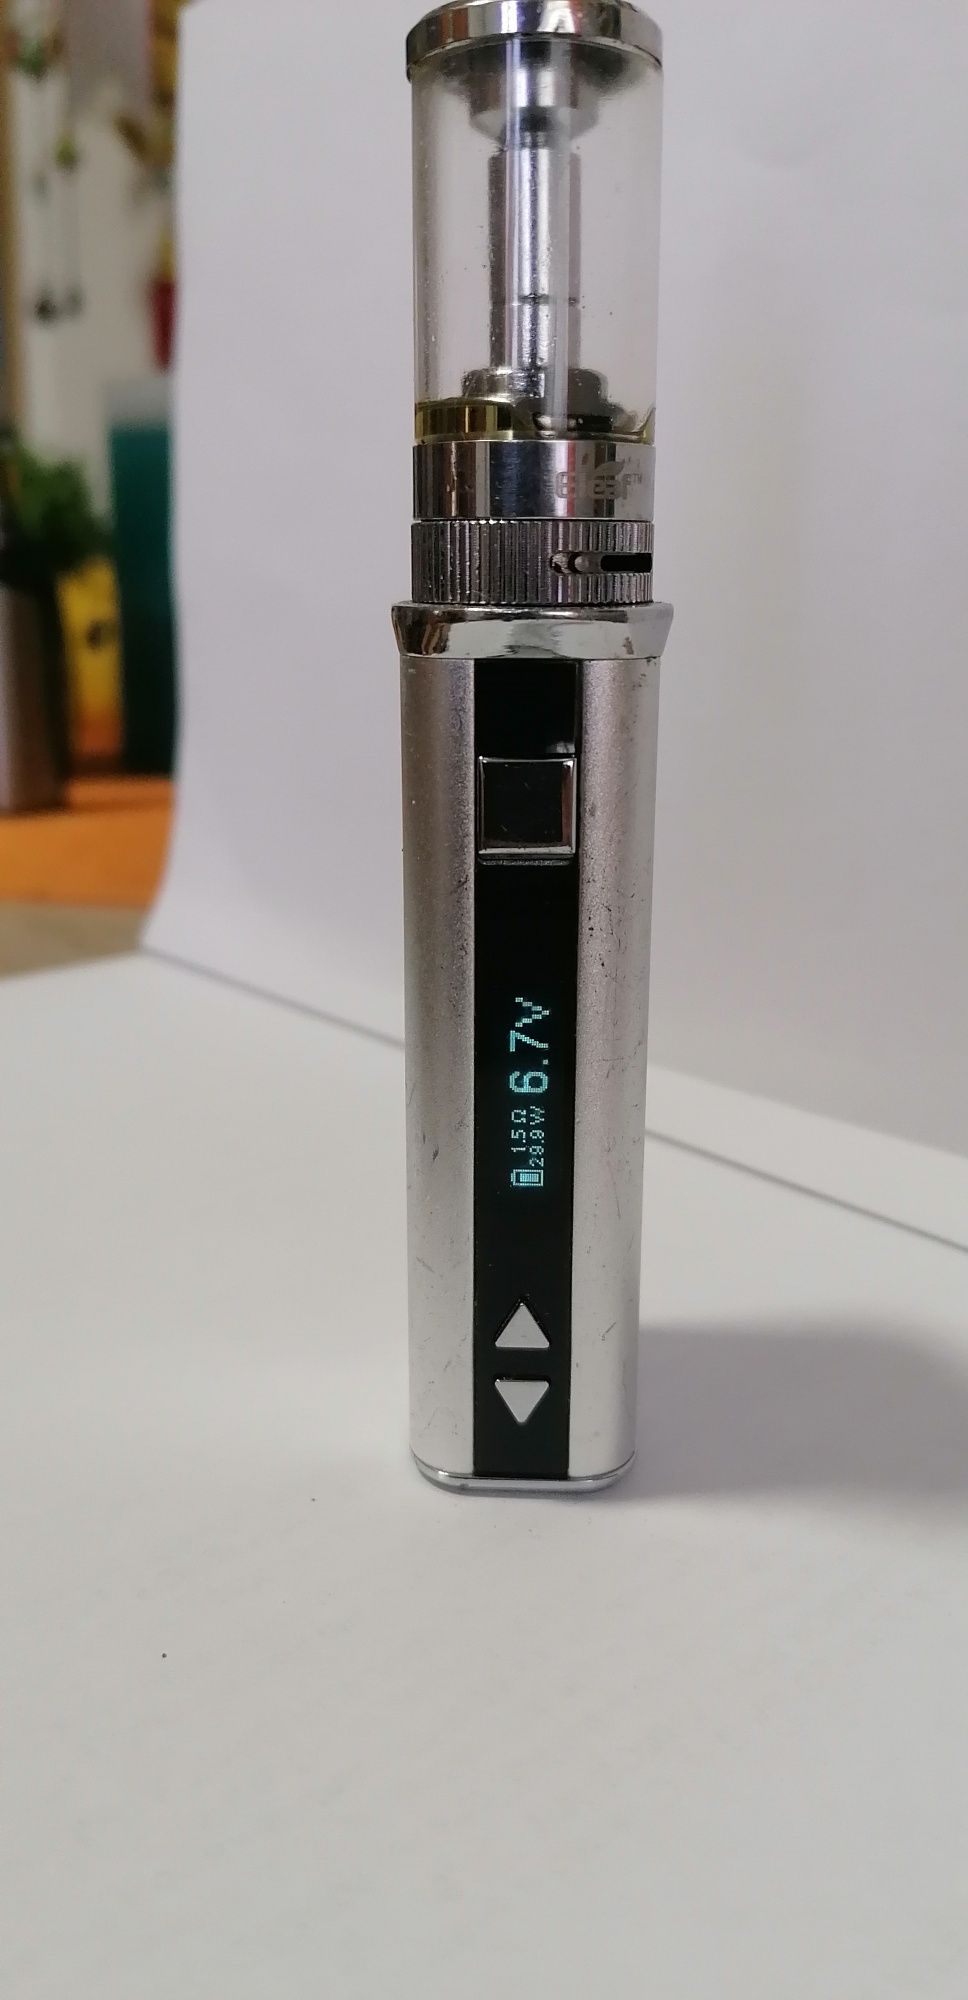 Istick 30w țigare electronica